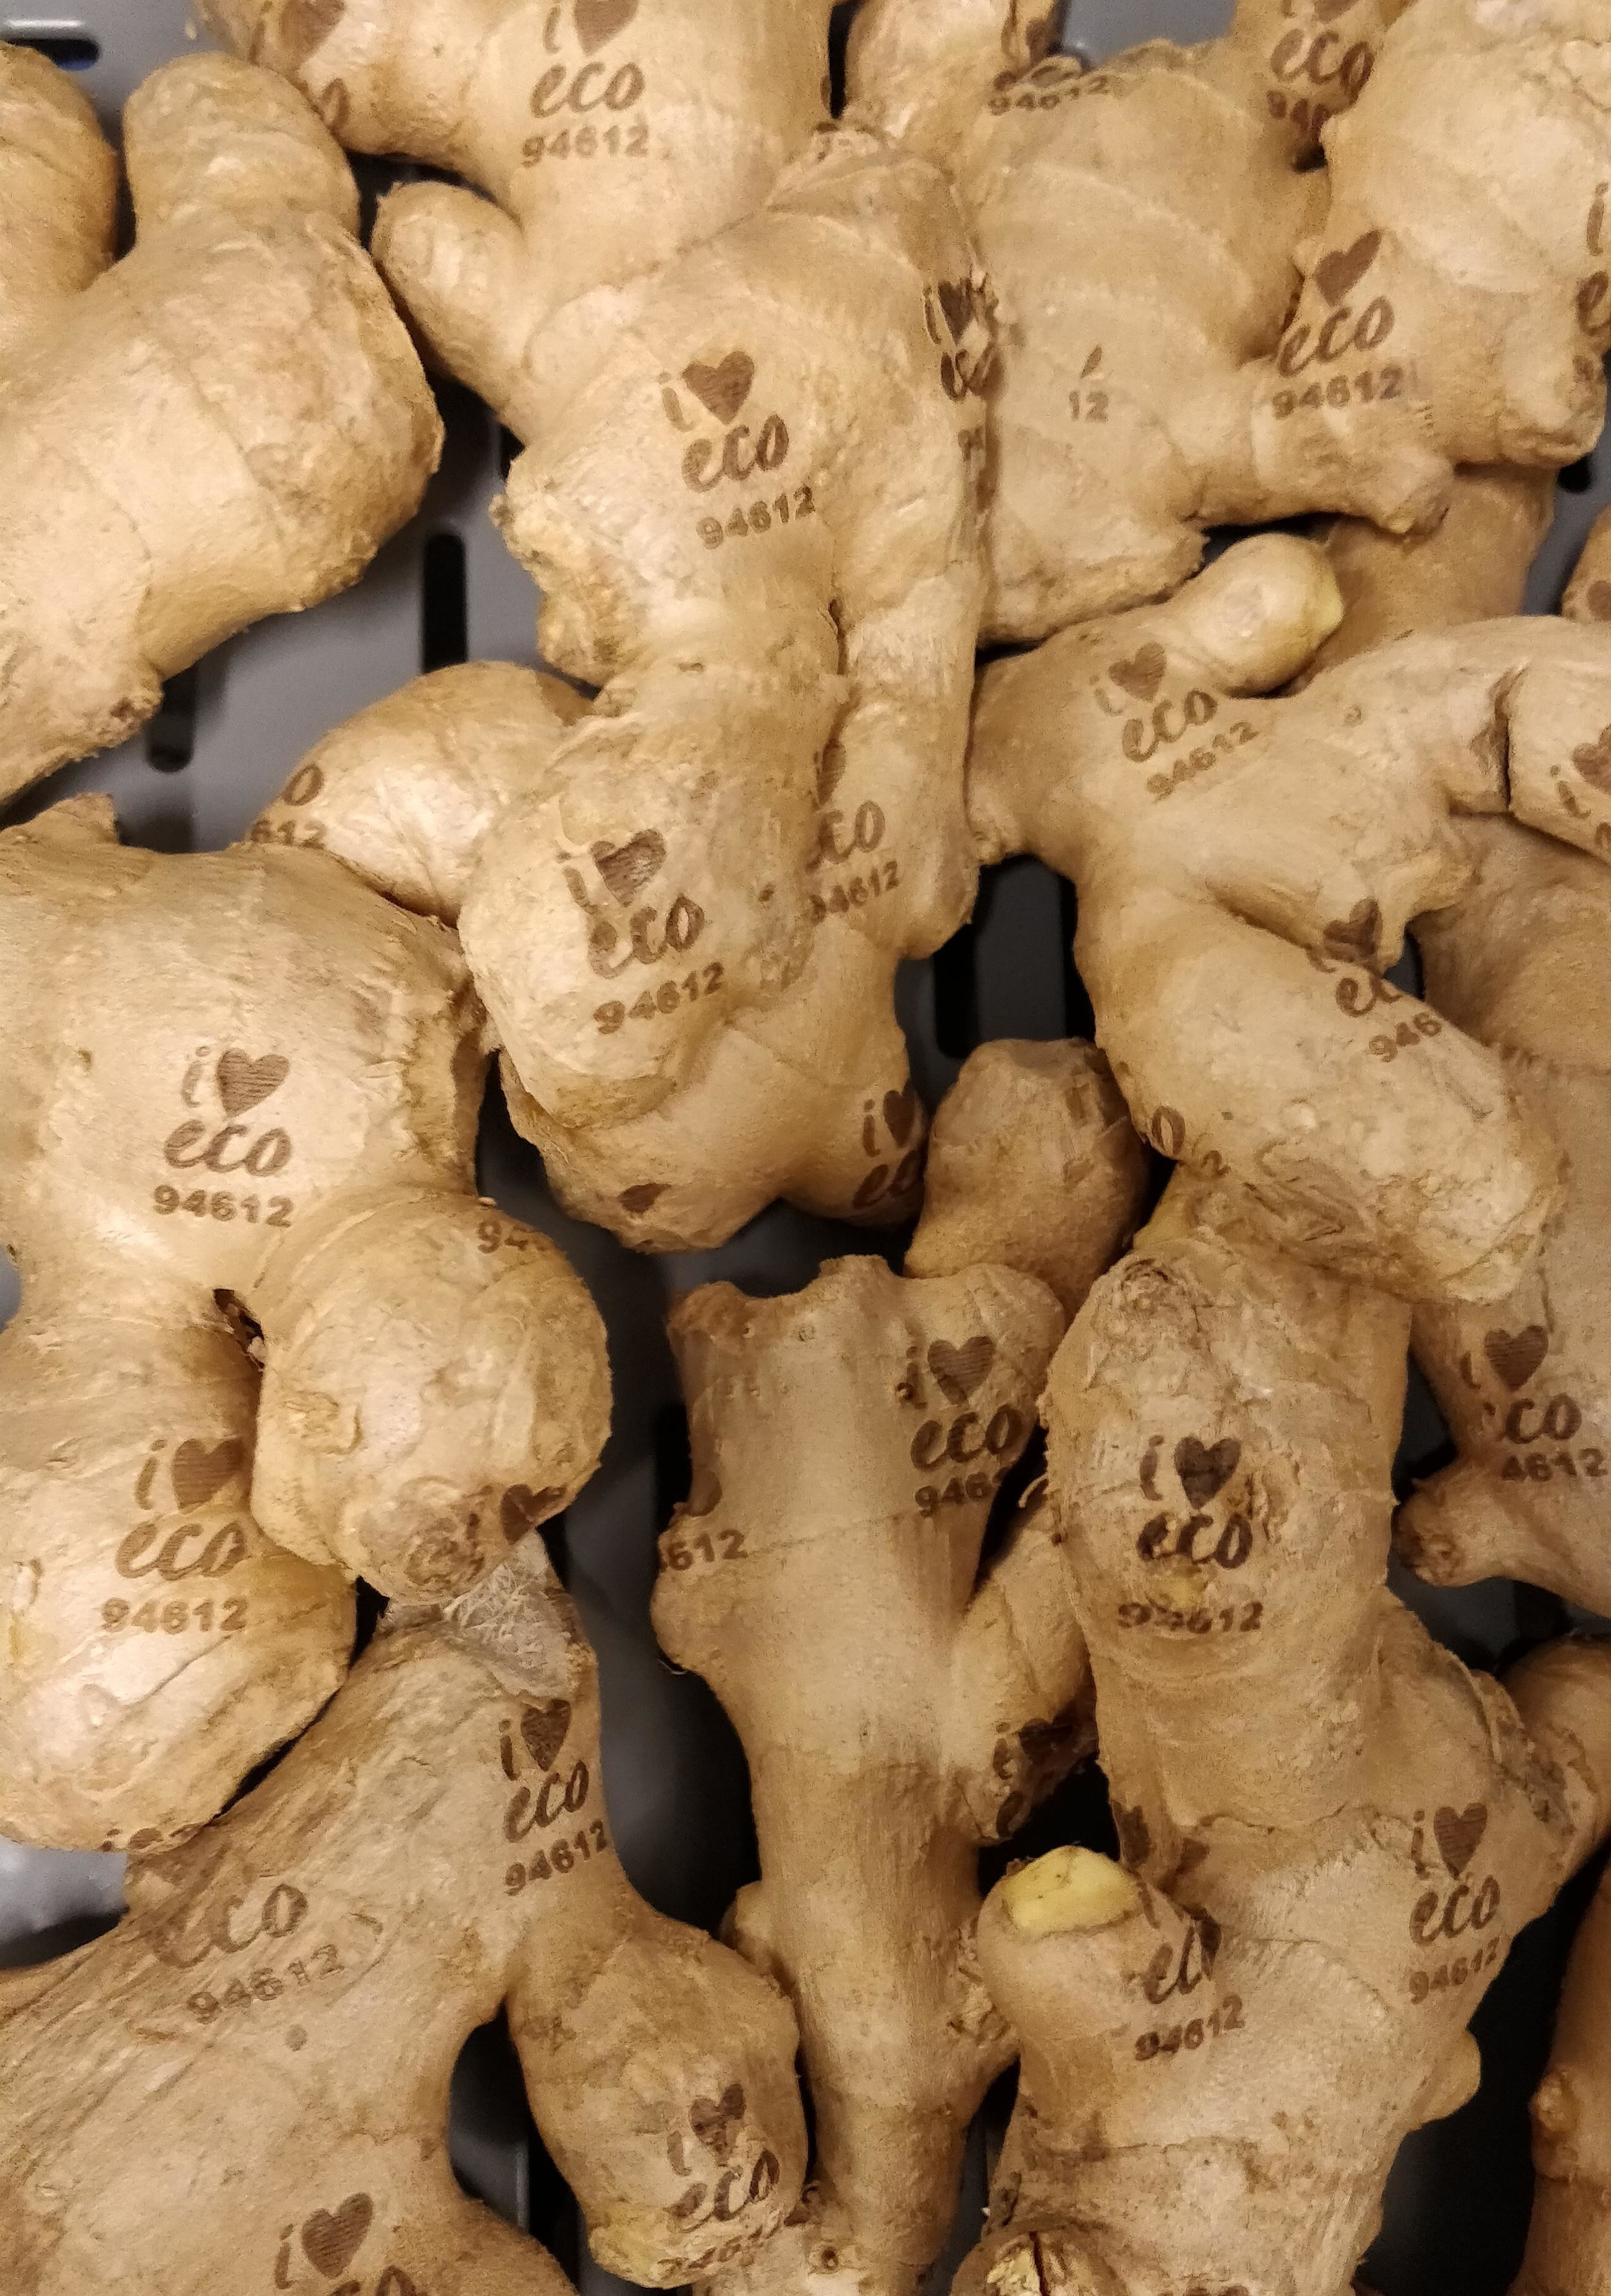 Ginger with a produce code printed on it.